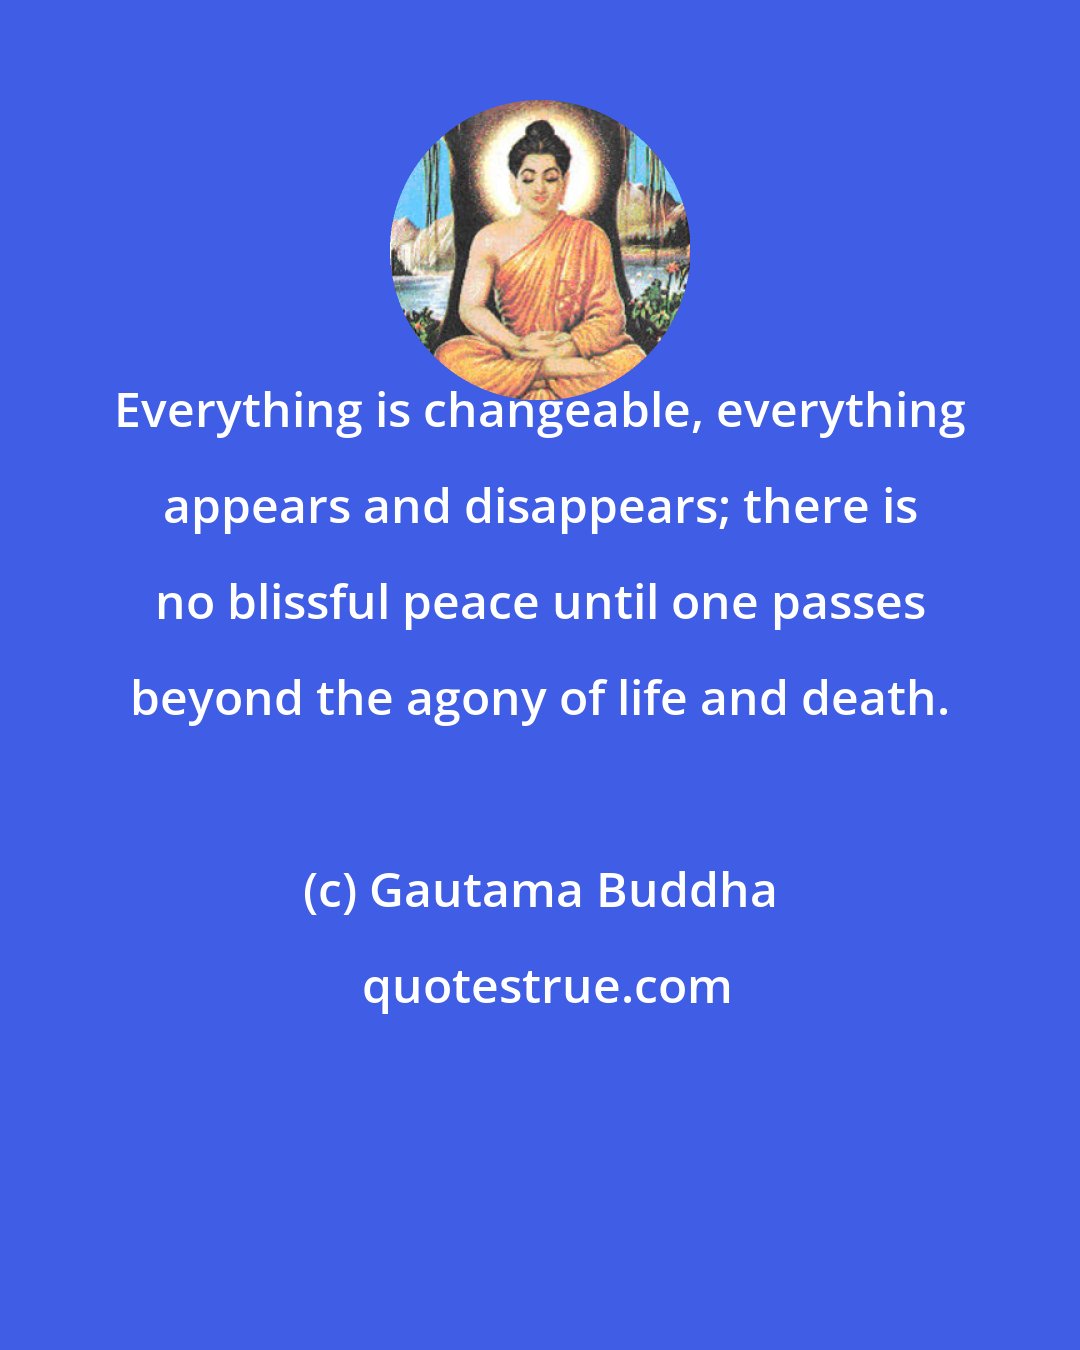 Gautama Buddha: Everything is changeable, everything appears and disappears; there is no blissful peace until one passes beyond the agony of life and death.